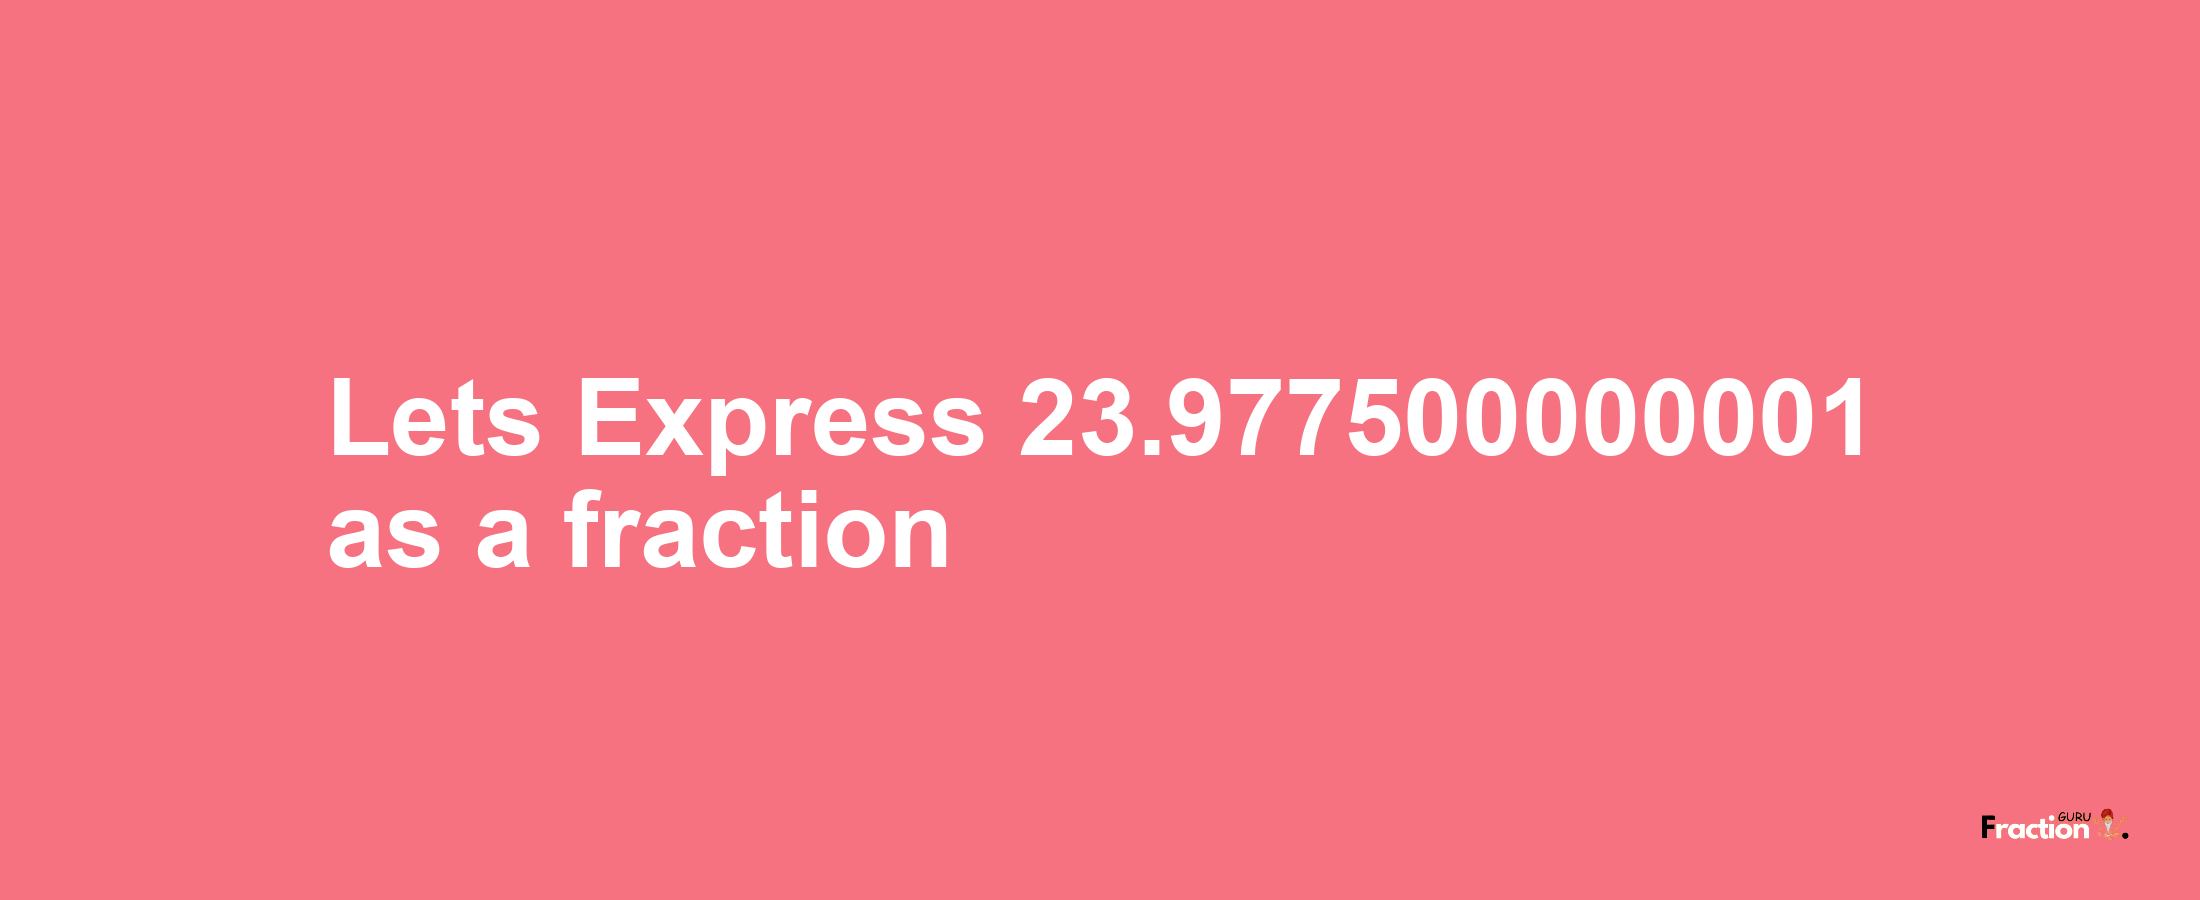 Lets Express 23.977500000001 as afraction